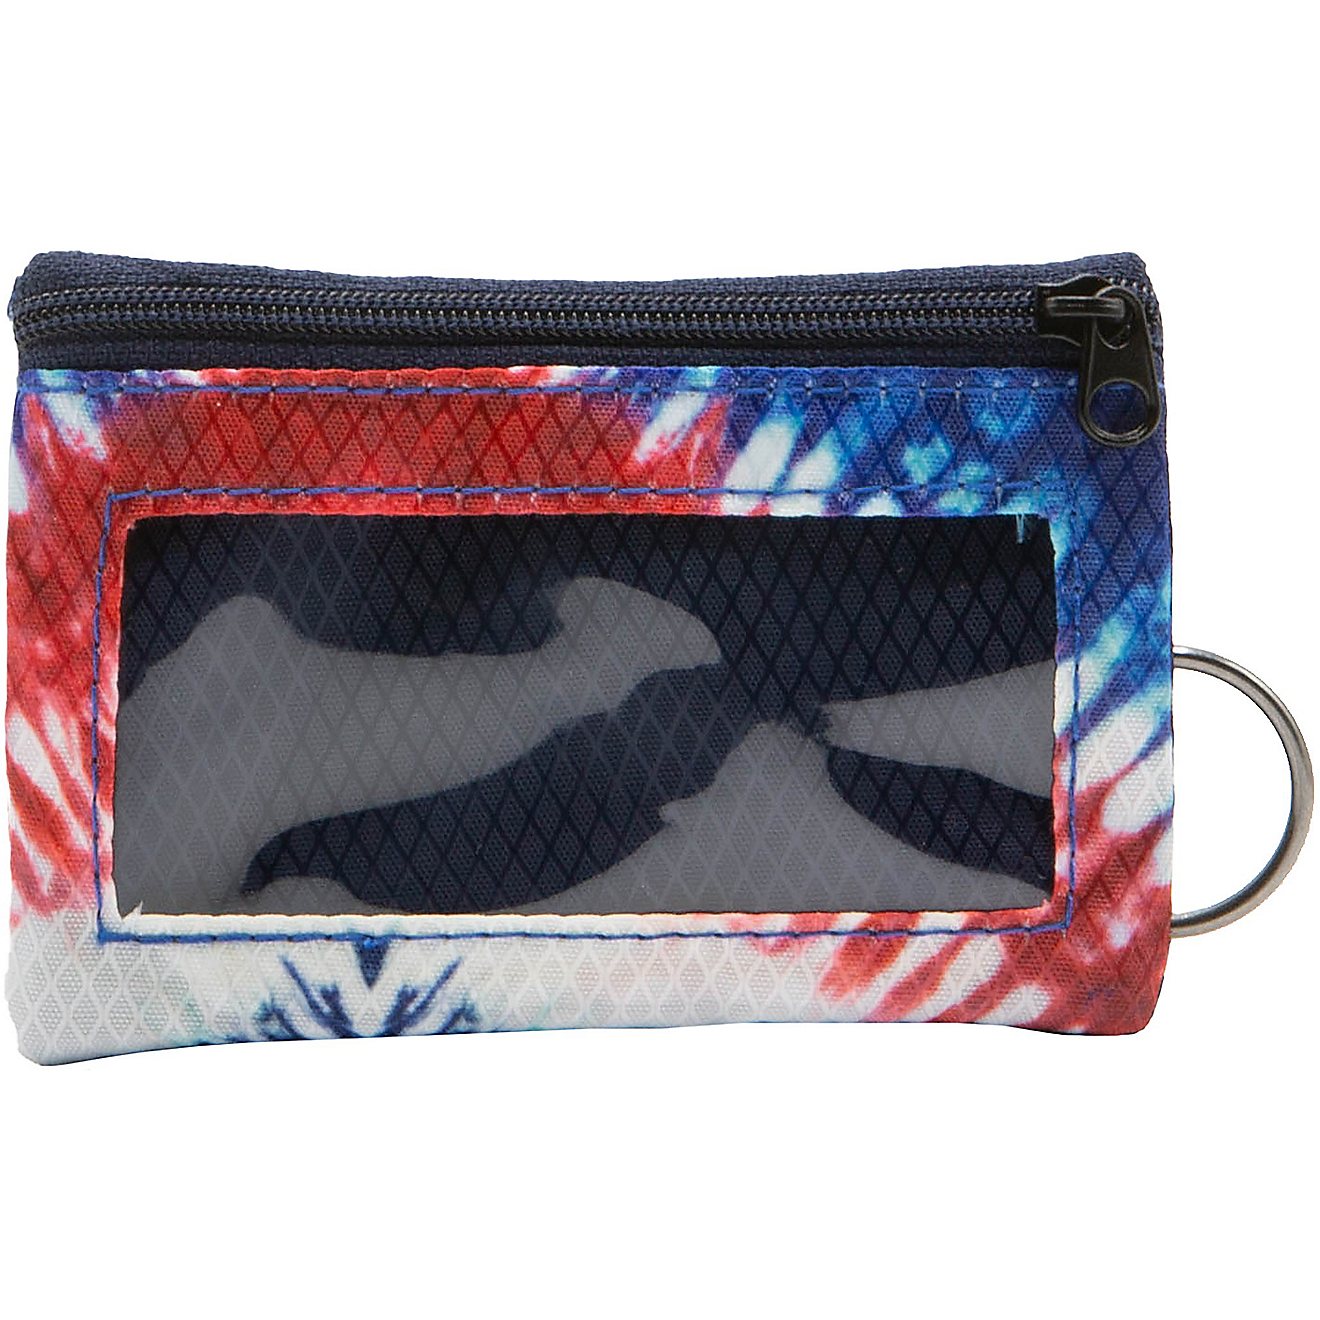 Chums Surfshort Wallet                                                                                                           - view number 2